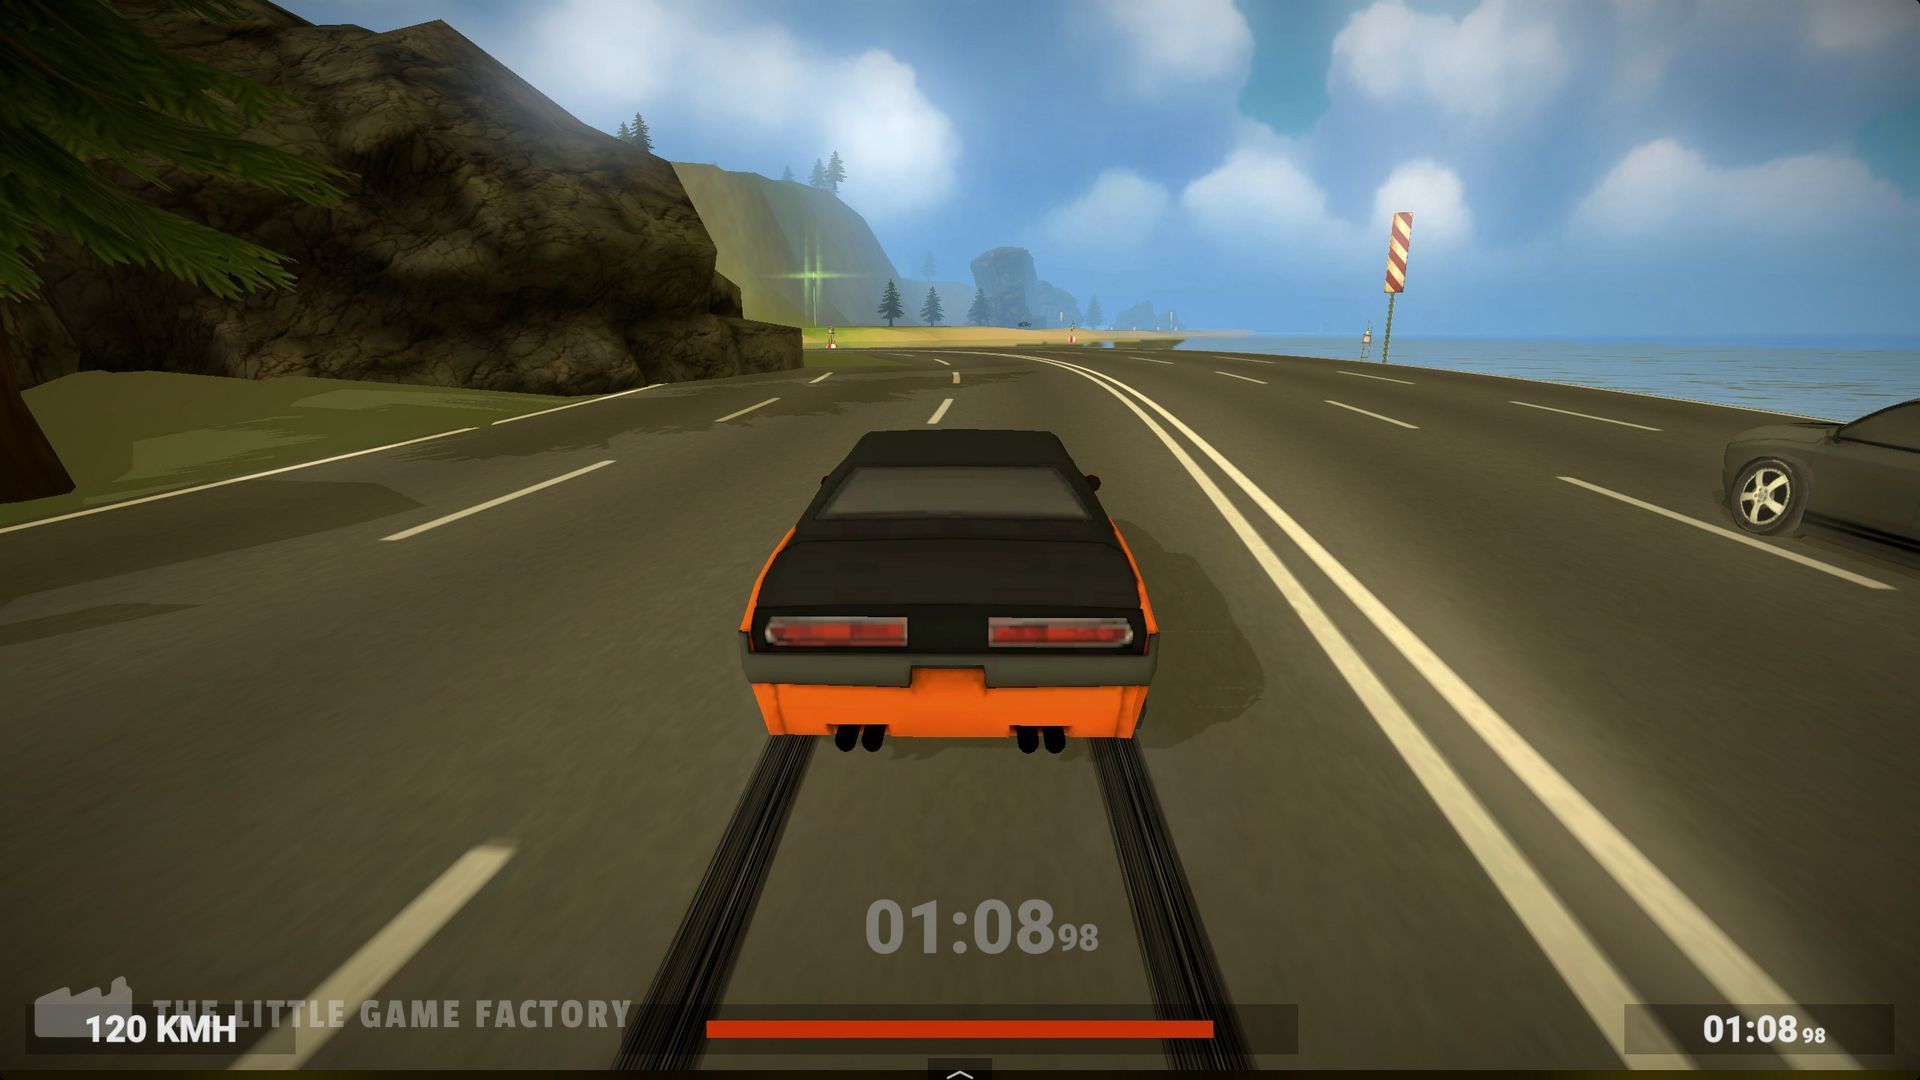 One Track Challenge Ingame Screenshot 3 | Unity WebGL game | Play WebGL games on thelittlegamefactory.com and supergoodgames.com